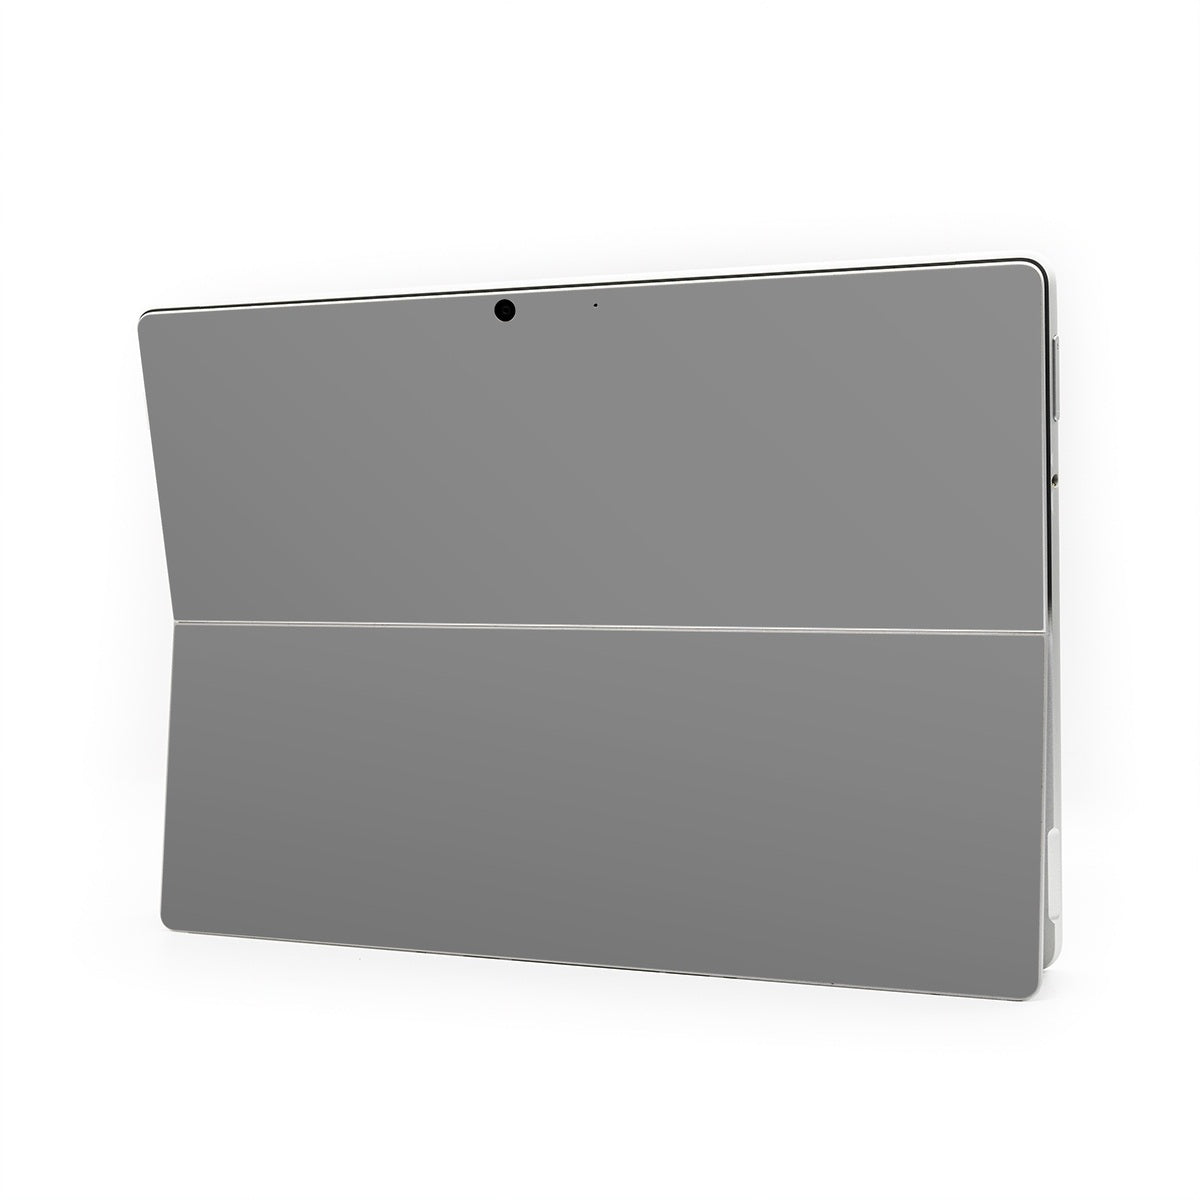 Solid State Grey - Microsoft Surface Pro Skin